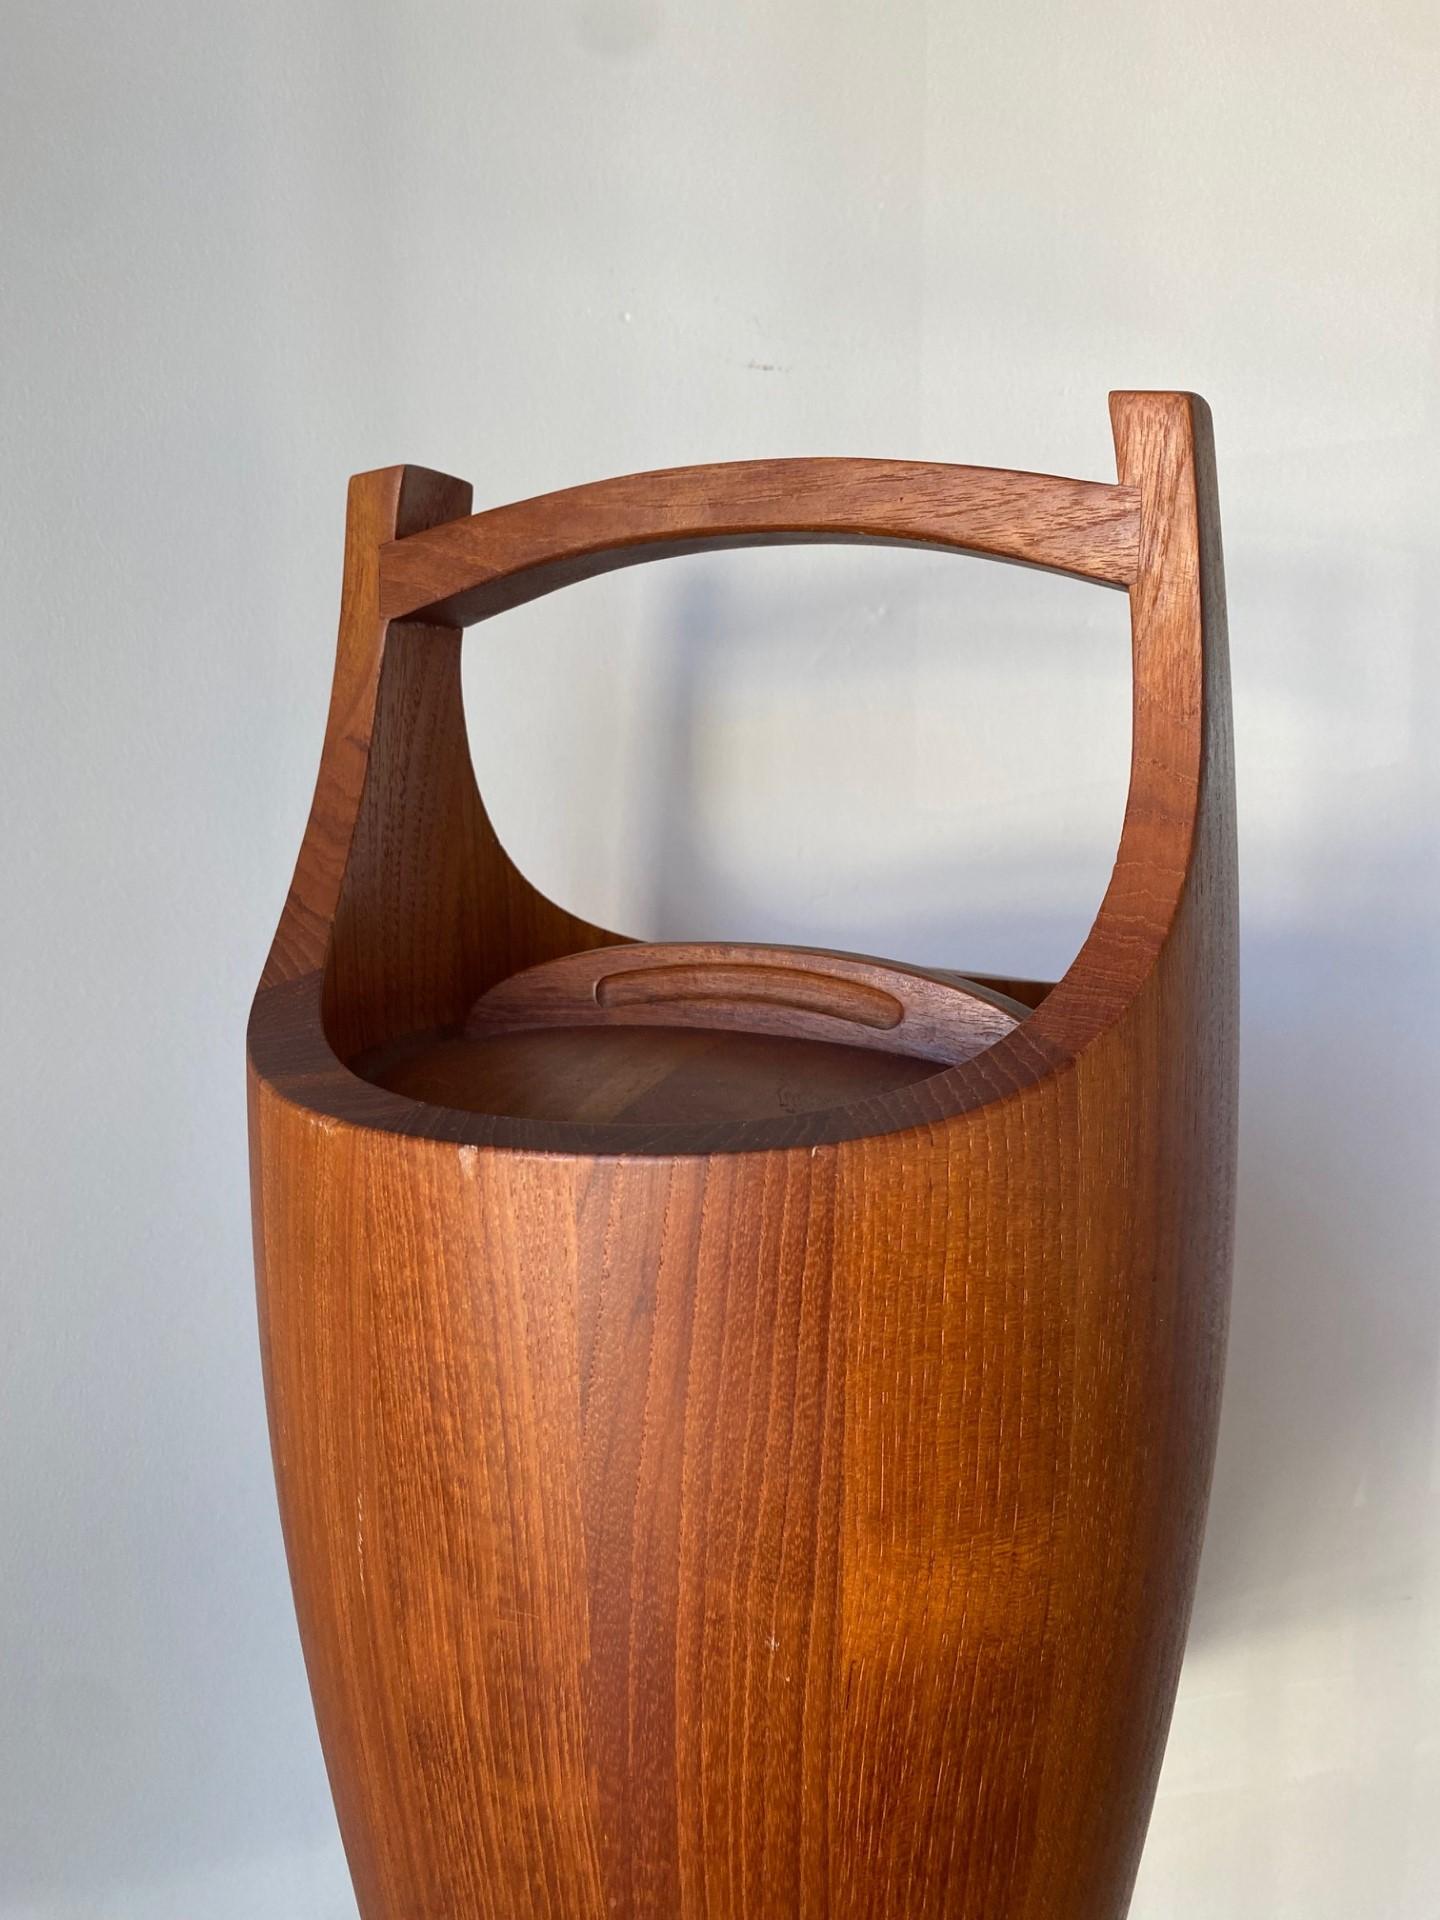 Vintage Dansk Large Teak Congo Ice Bucket by Jens H. Quistgaard In Good Condition For Sale In San Diego, CA